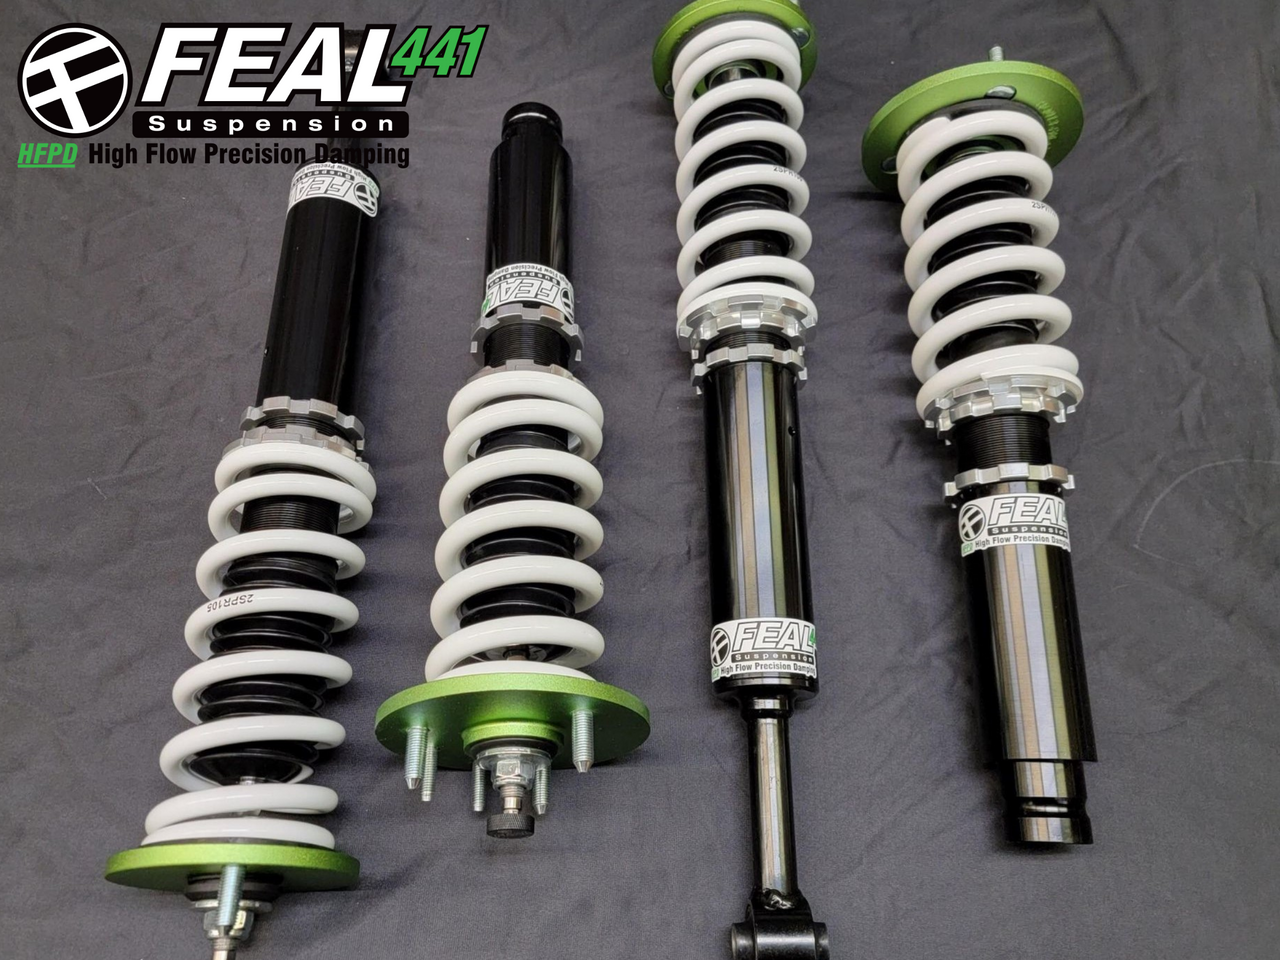 Feal Suspension 441 Coilovers - 2004 - 2008 Acura TSX